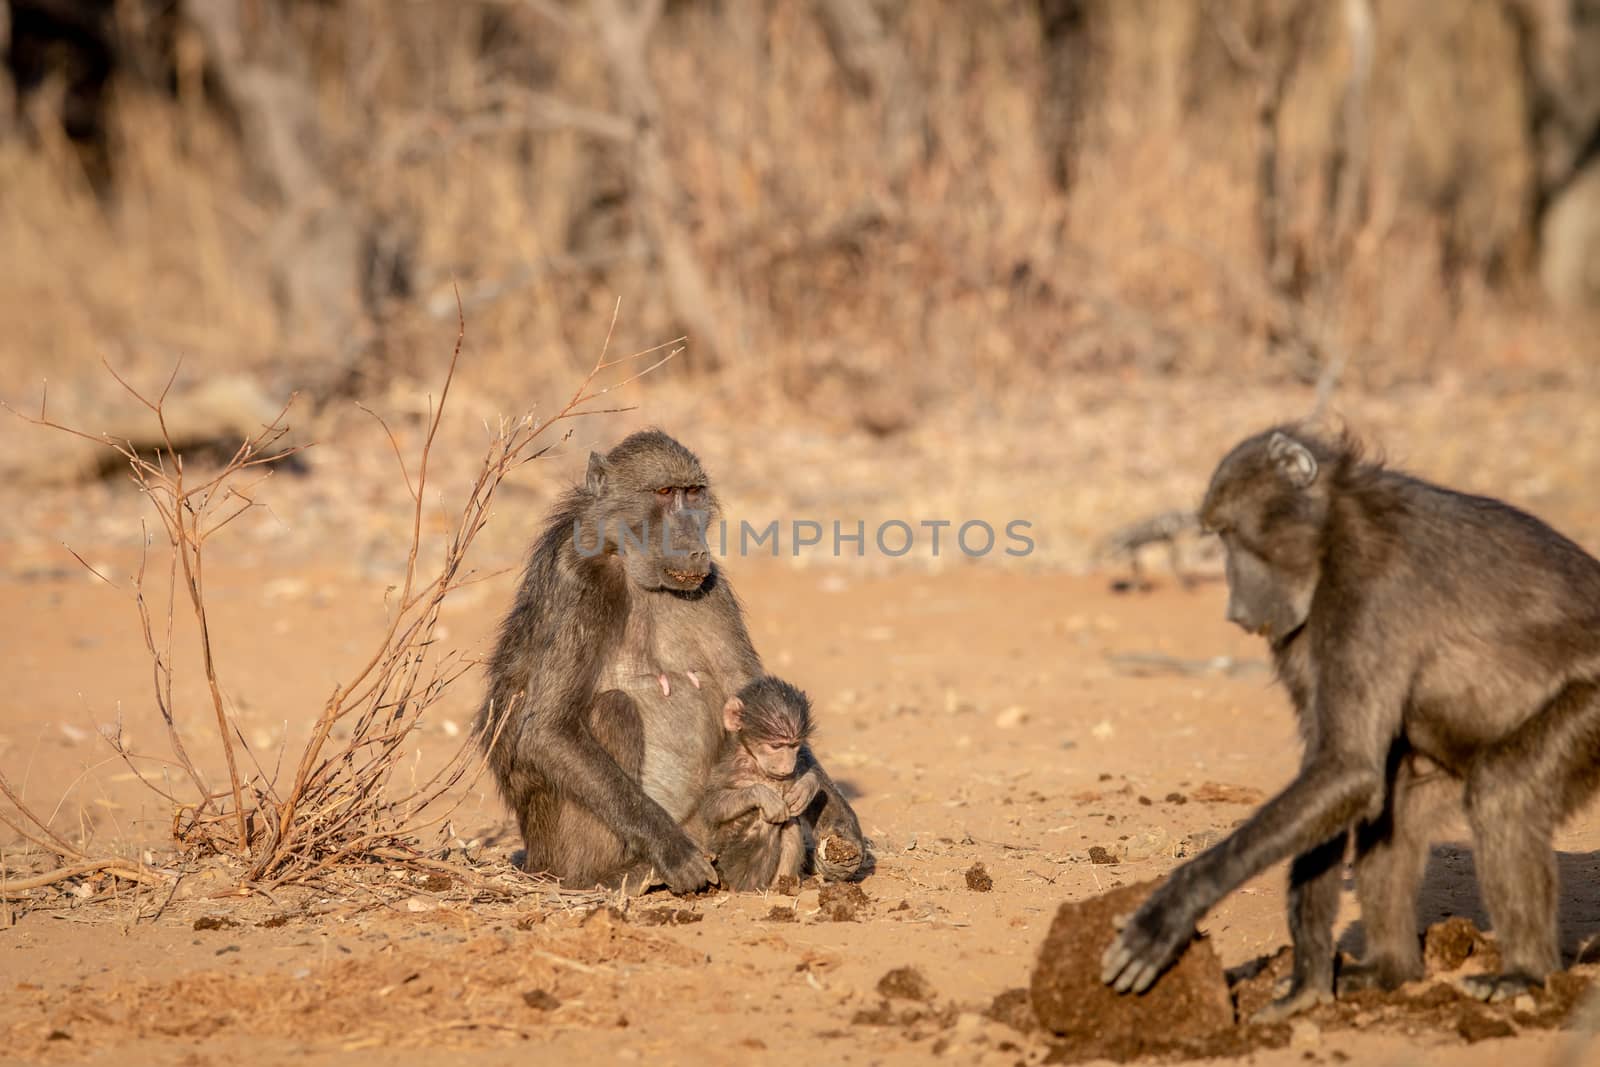 Chacma baboon with a baby sitting in the grass in the Welgevonden game reserve, South Africa.